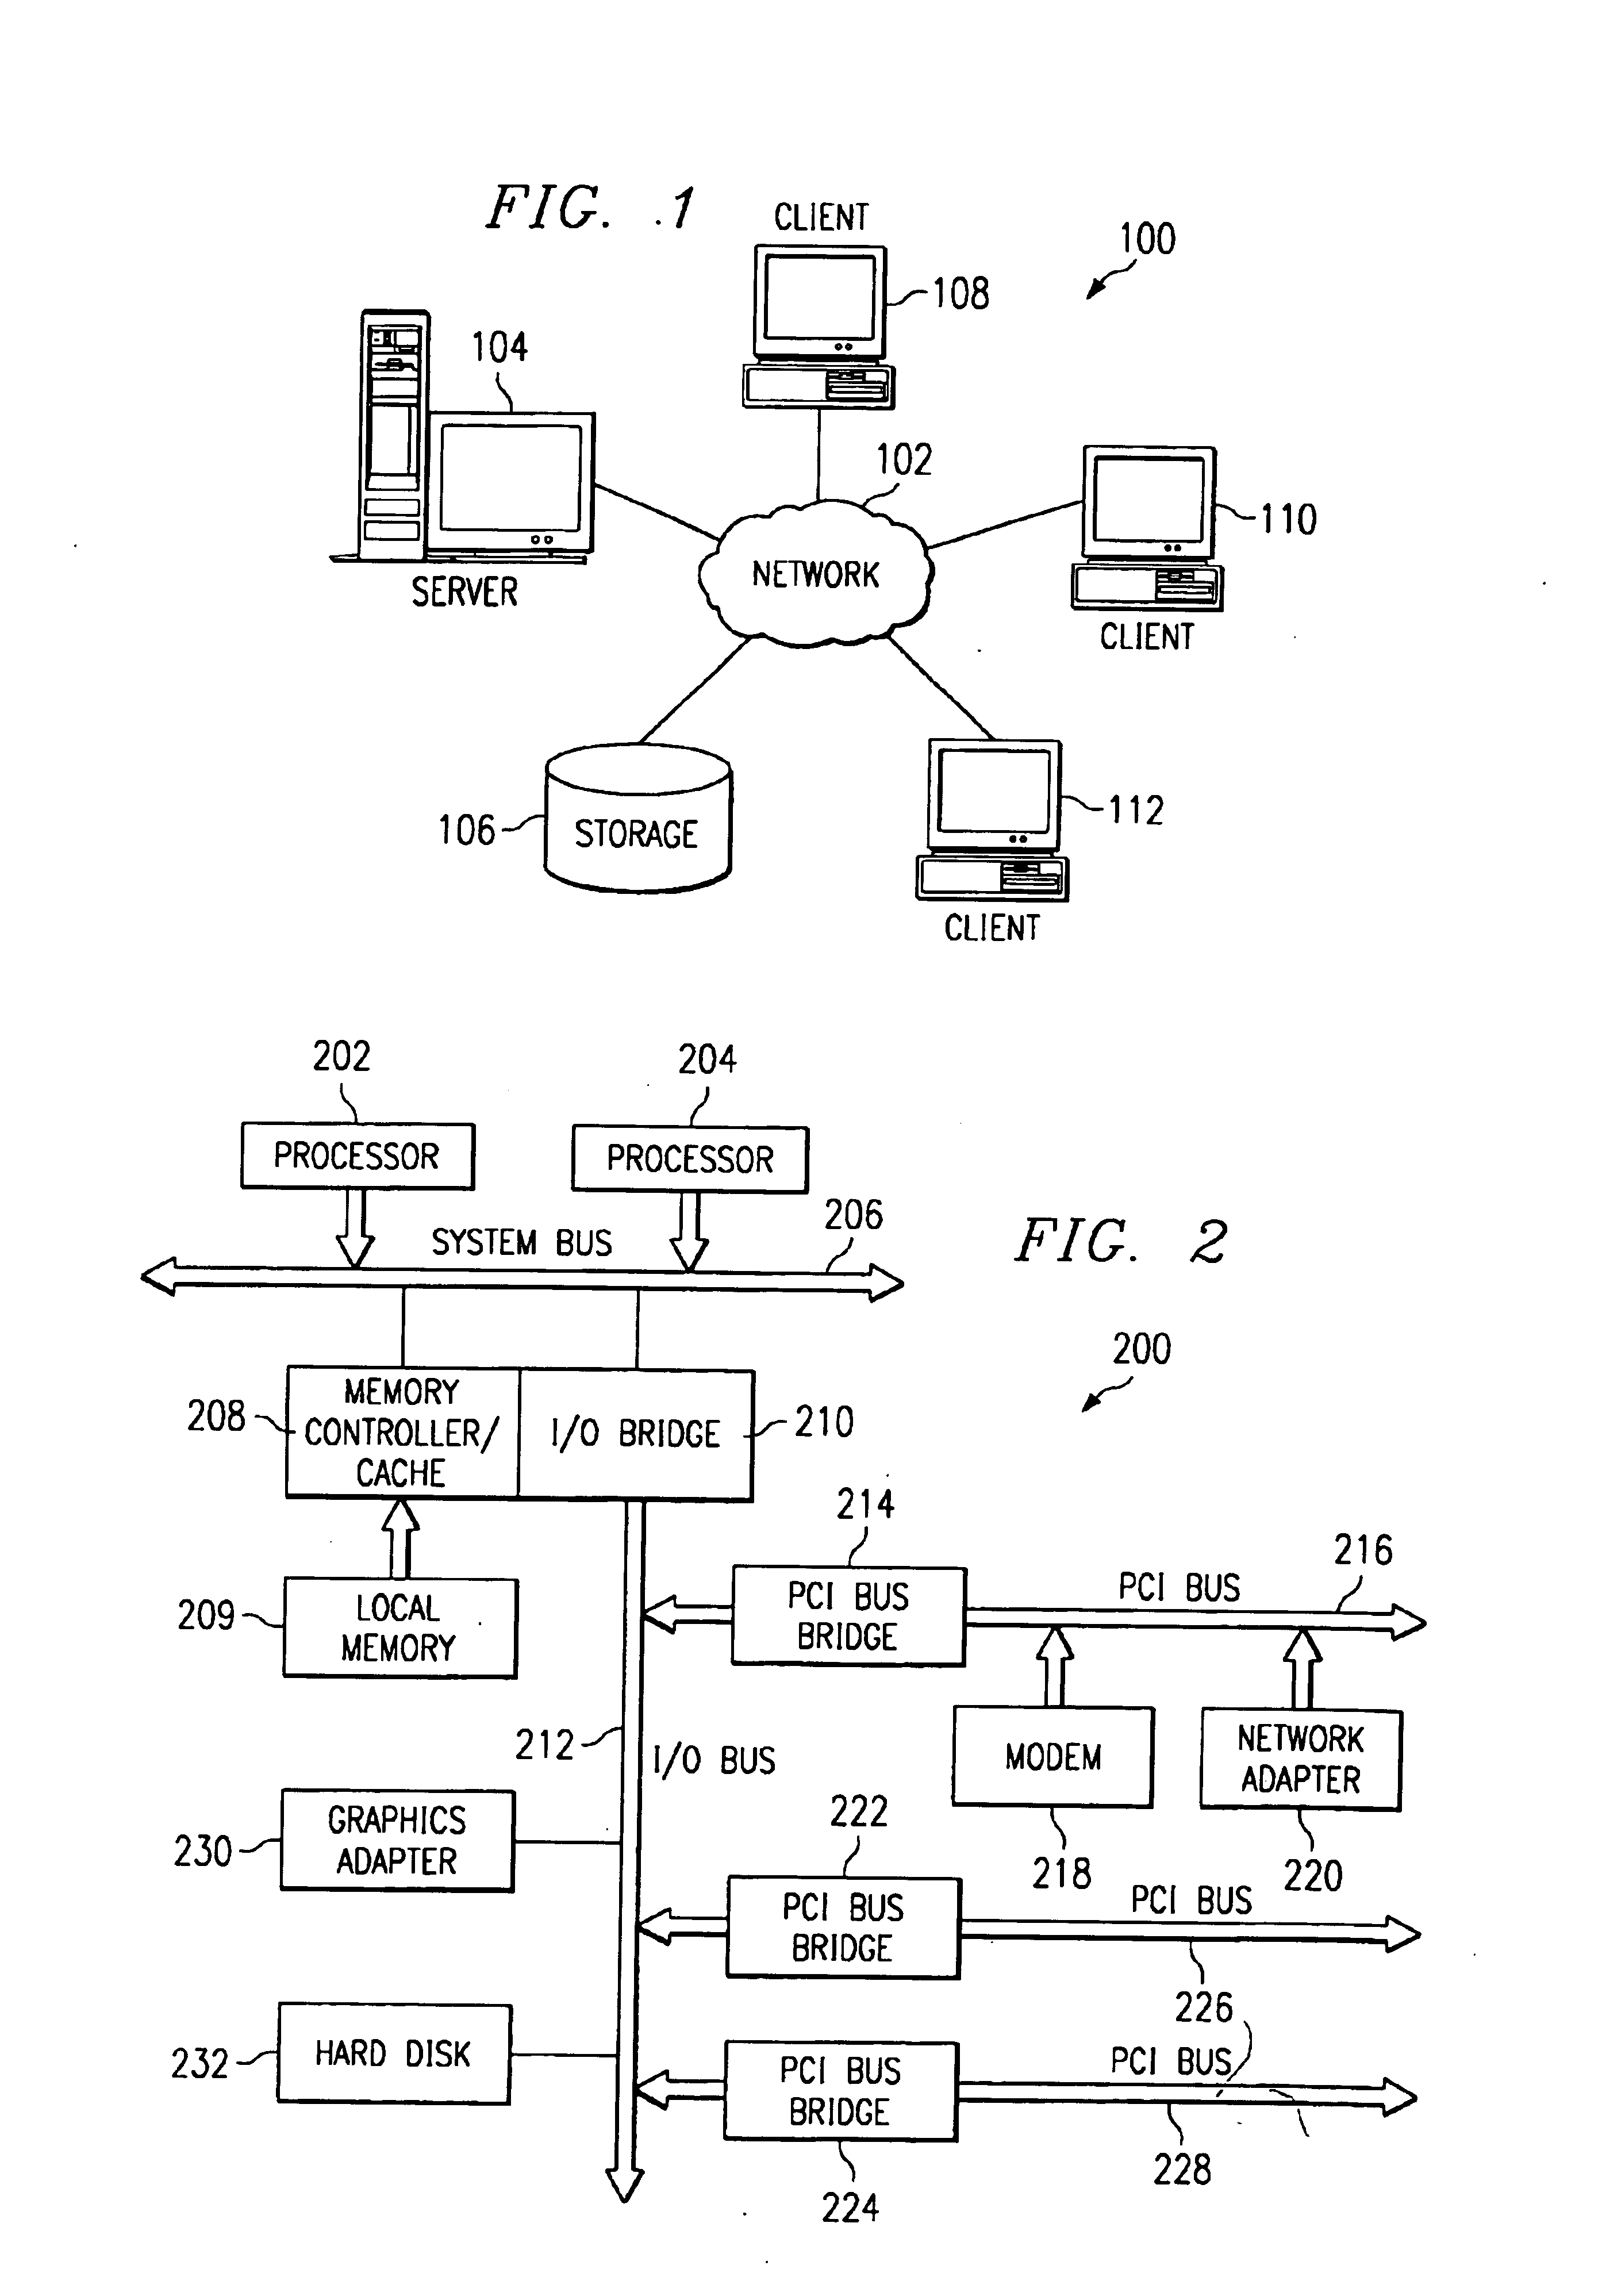 Apparatus and method for workload management using class shares and tiers